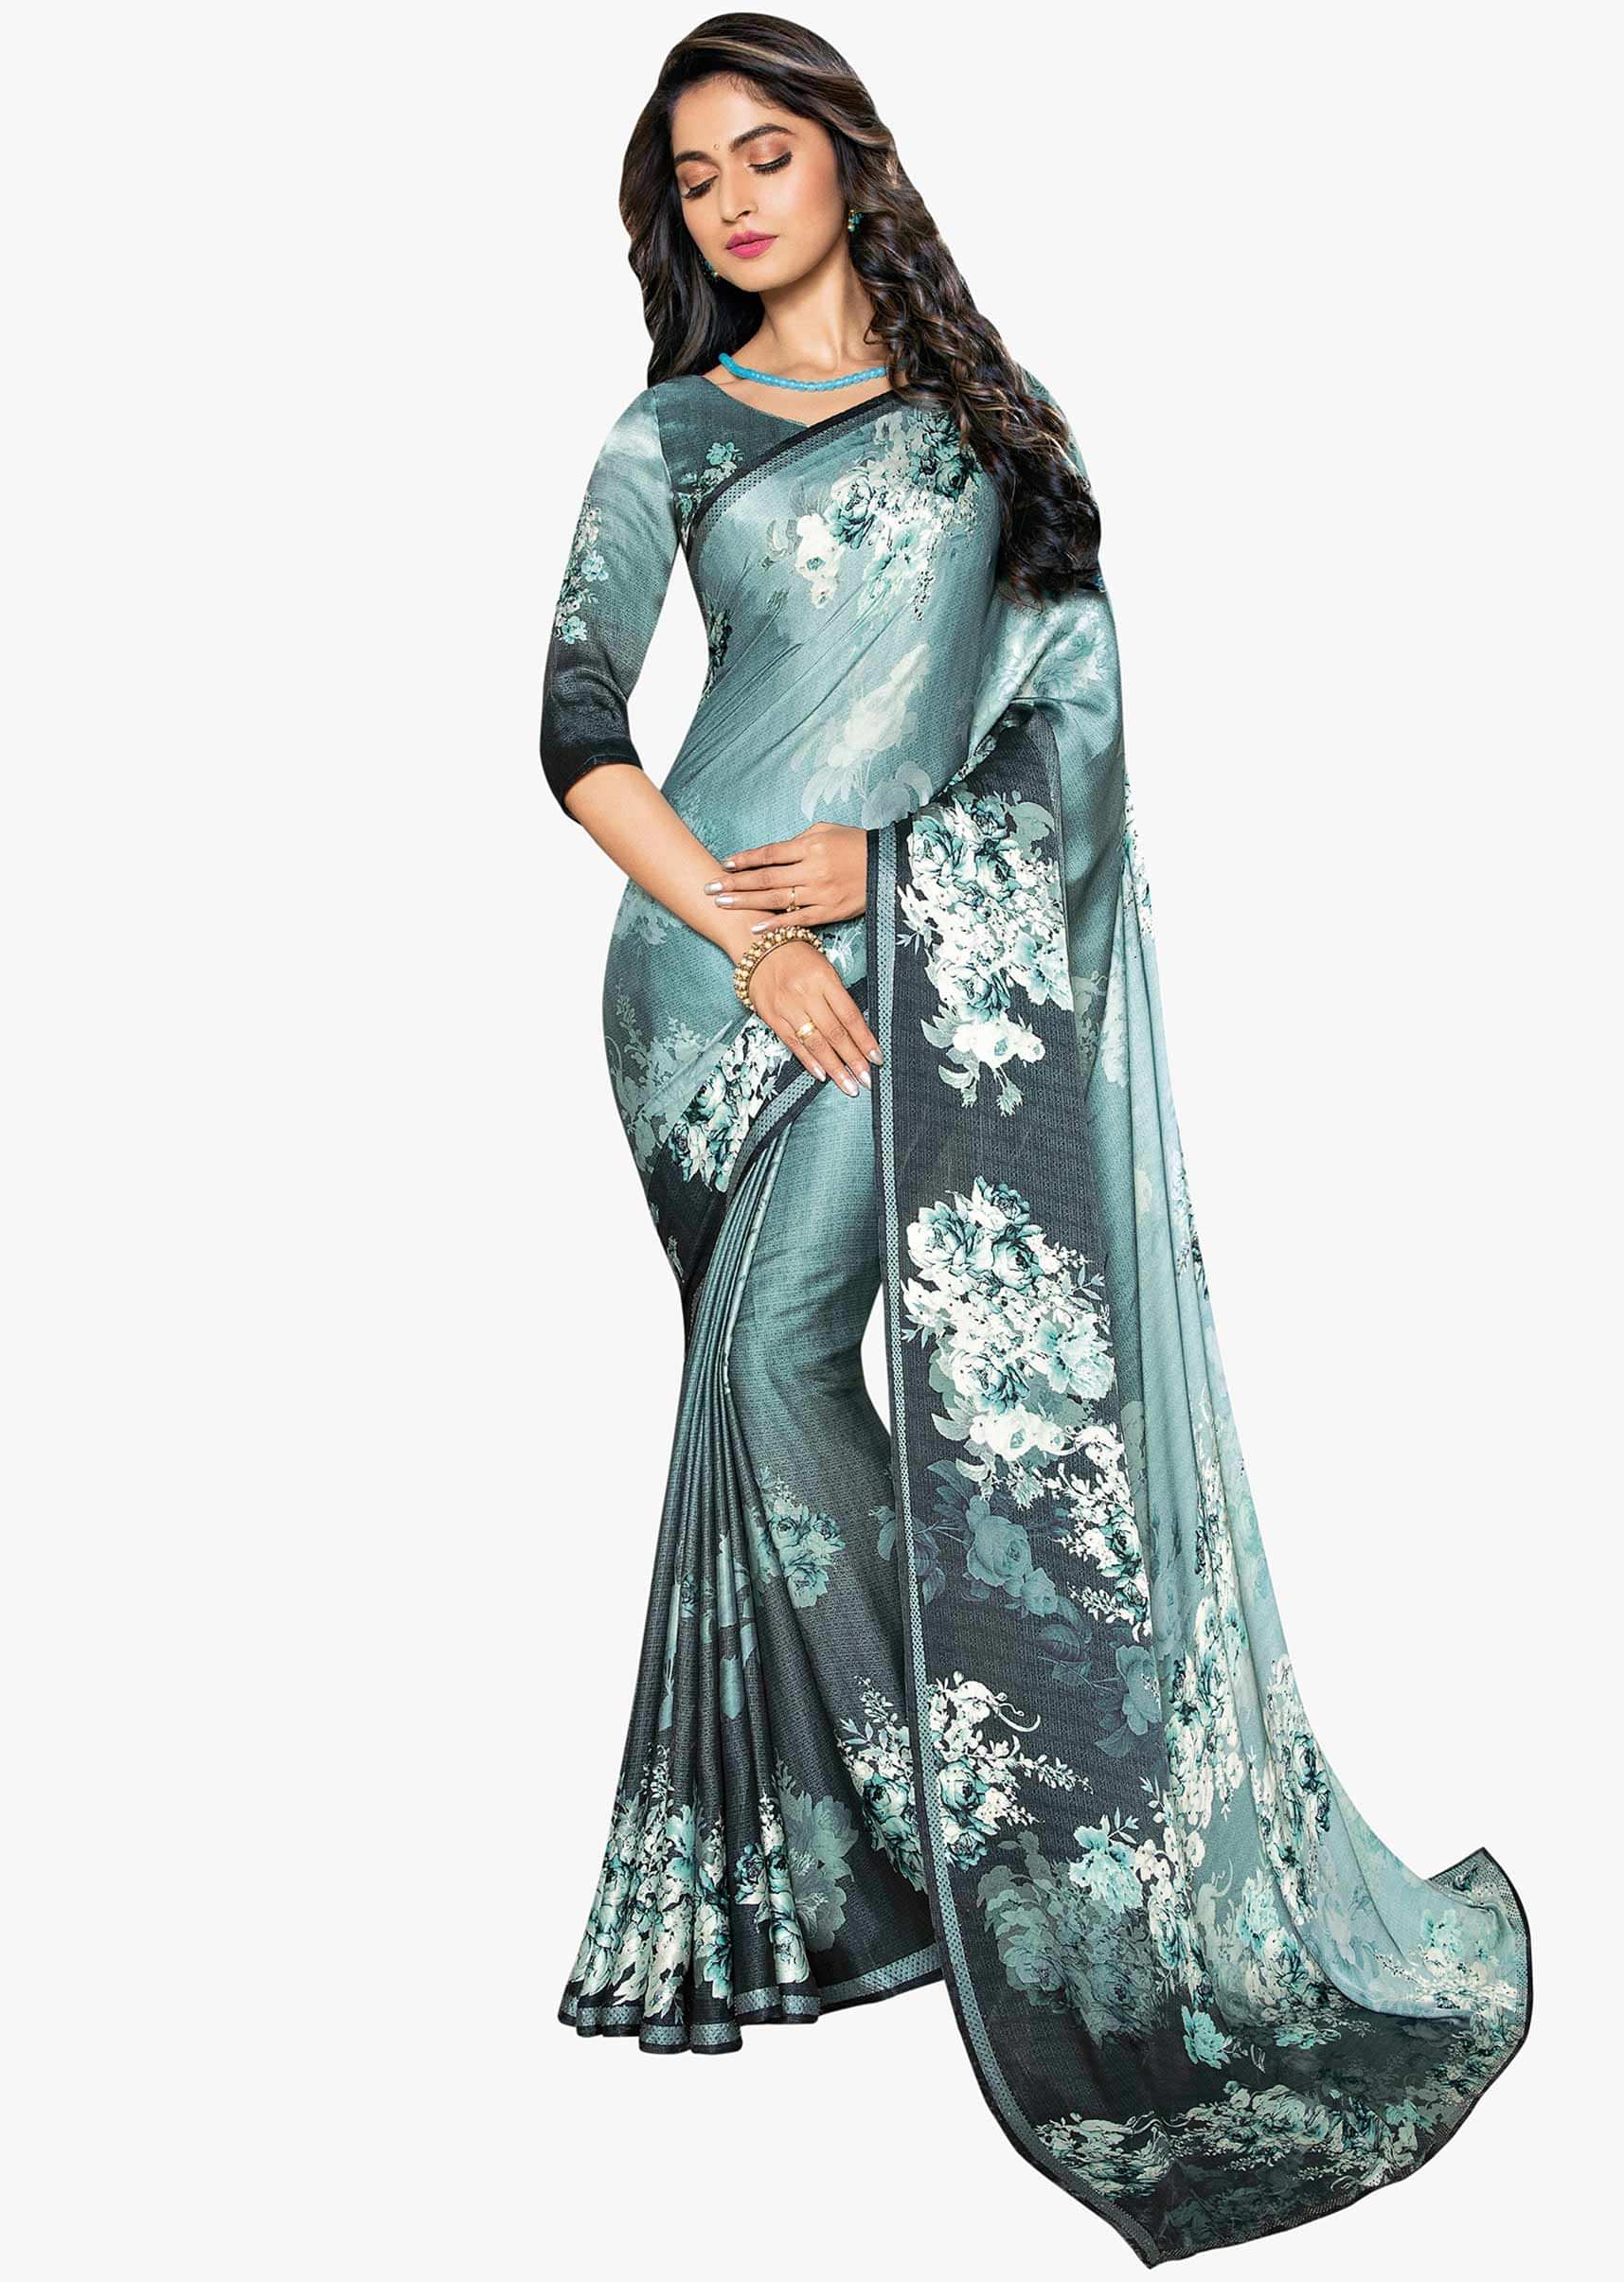 Mint green shaded satin saree in floral print only on Kalki 